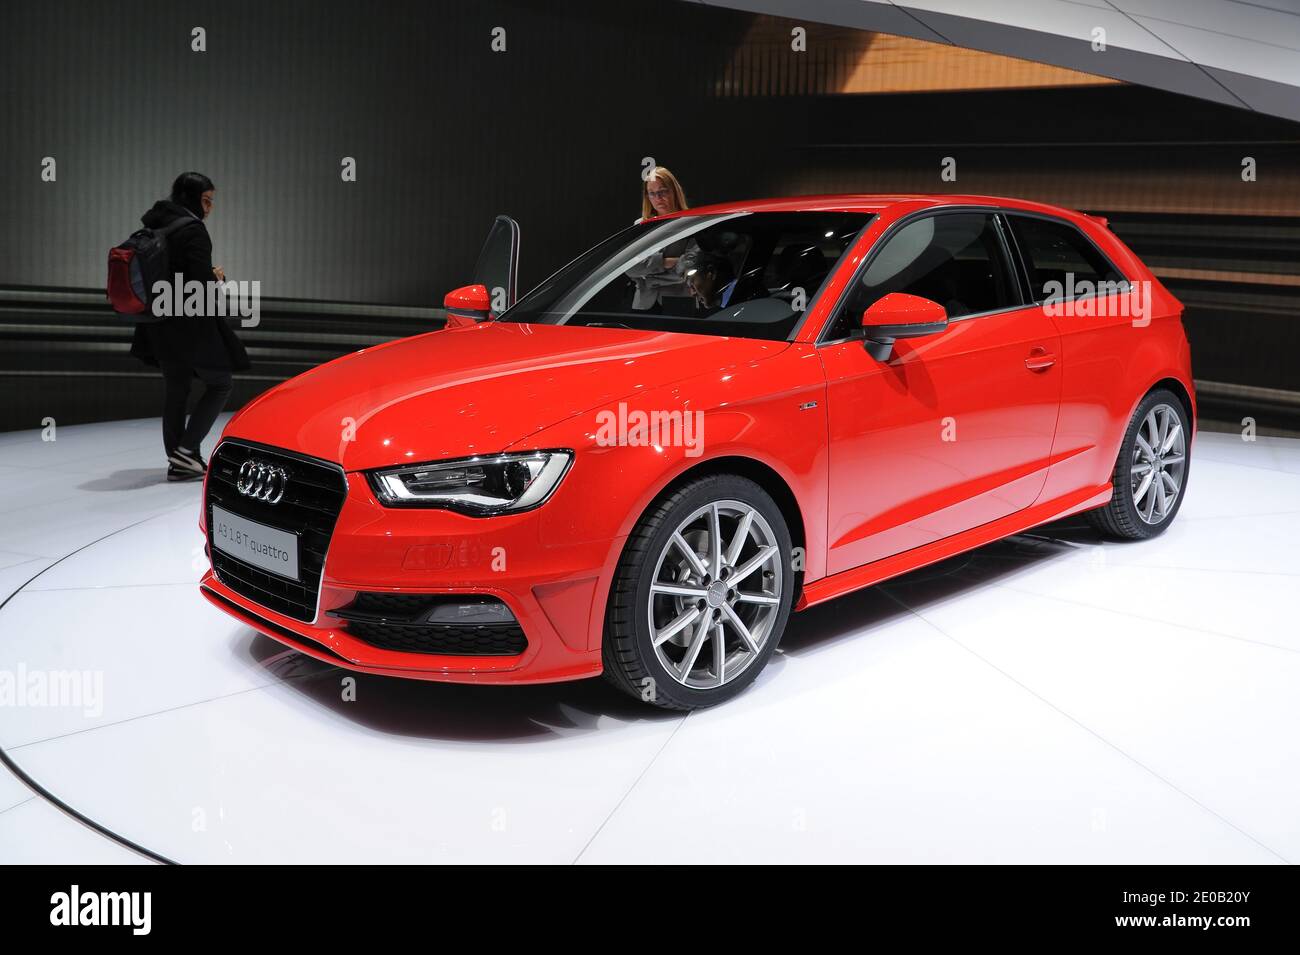 Audi A3 1.8 T quattro on display at the 82nd International Motor Show and  Accessories of Geneva, Switzerland on March 7, 2012. Photo by  Loona/ABACAPRESS.COM Stock Photo - Alamy